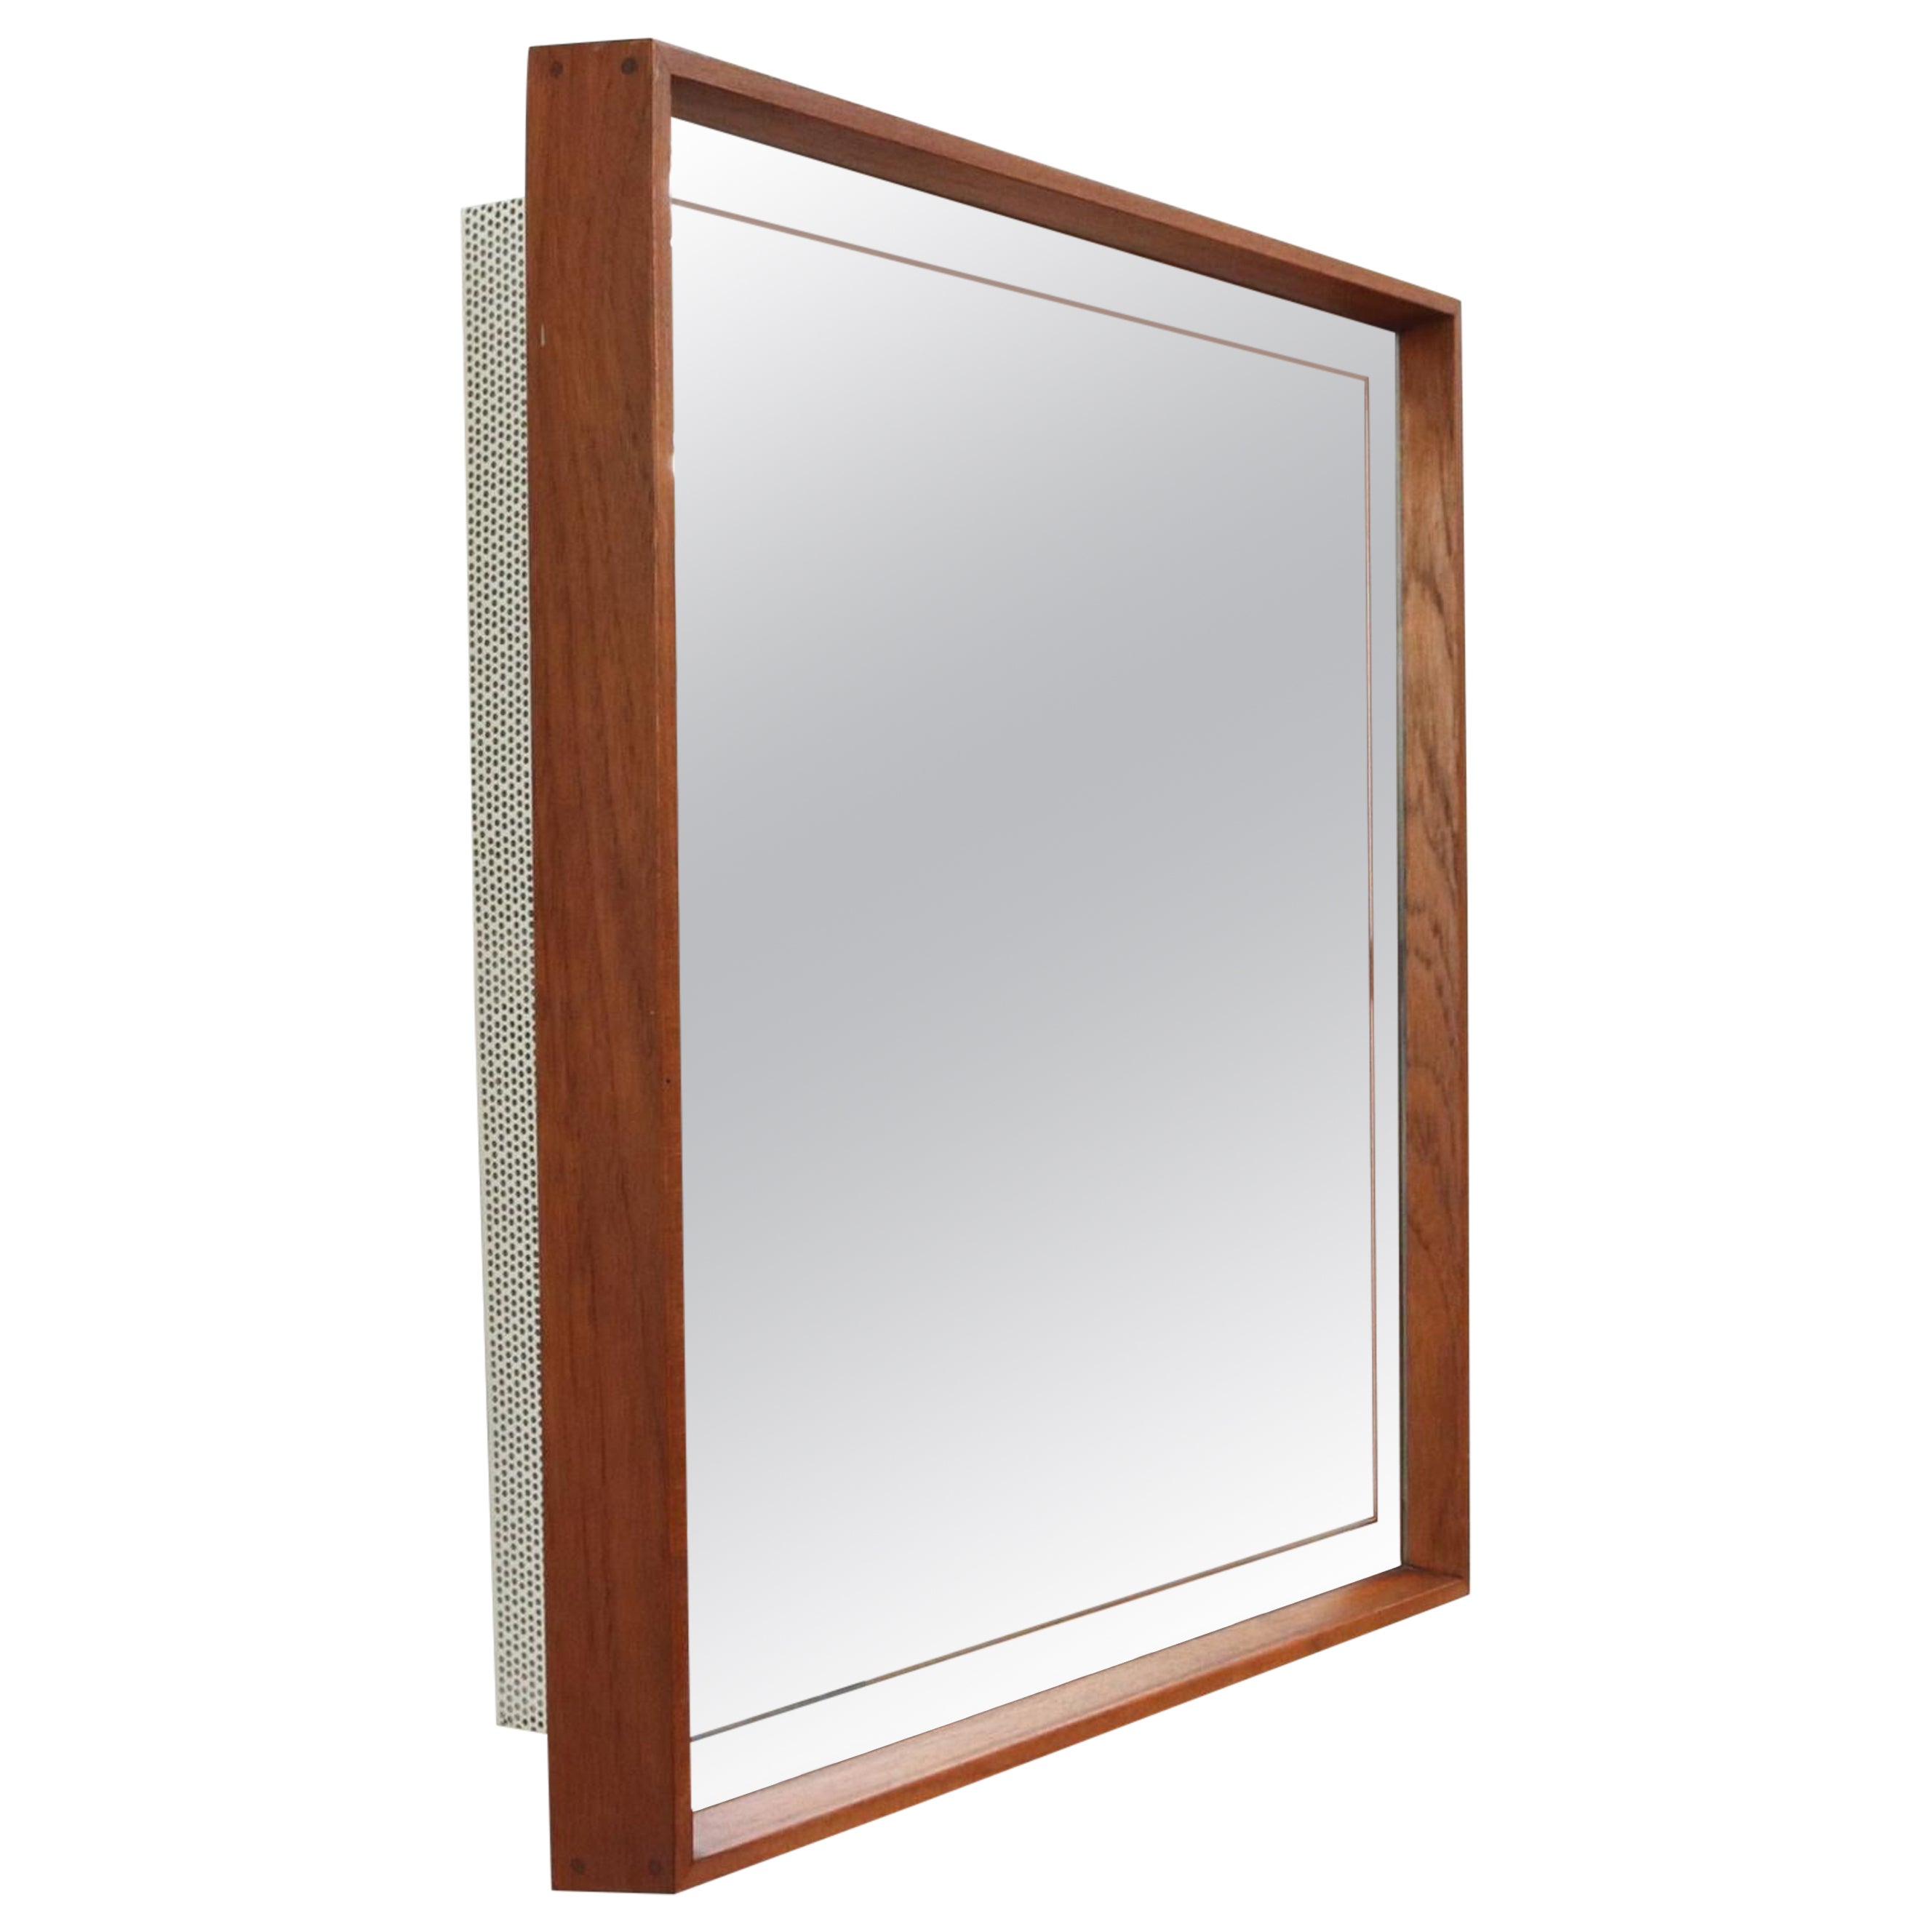 Mategot Inspired Backlit Mirror with Perforated White Metal Frame and Teak Frame For Sale